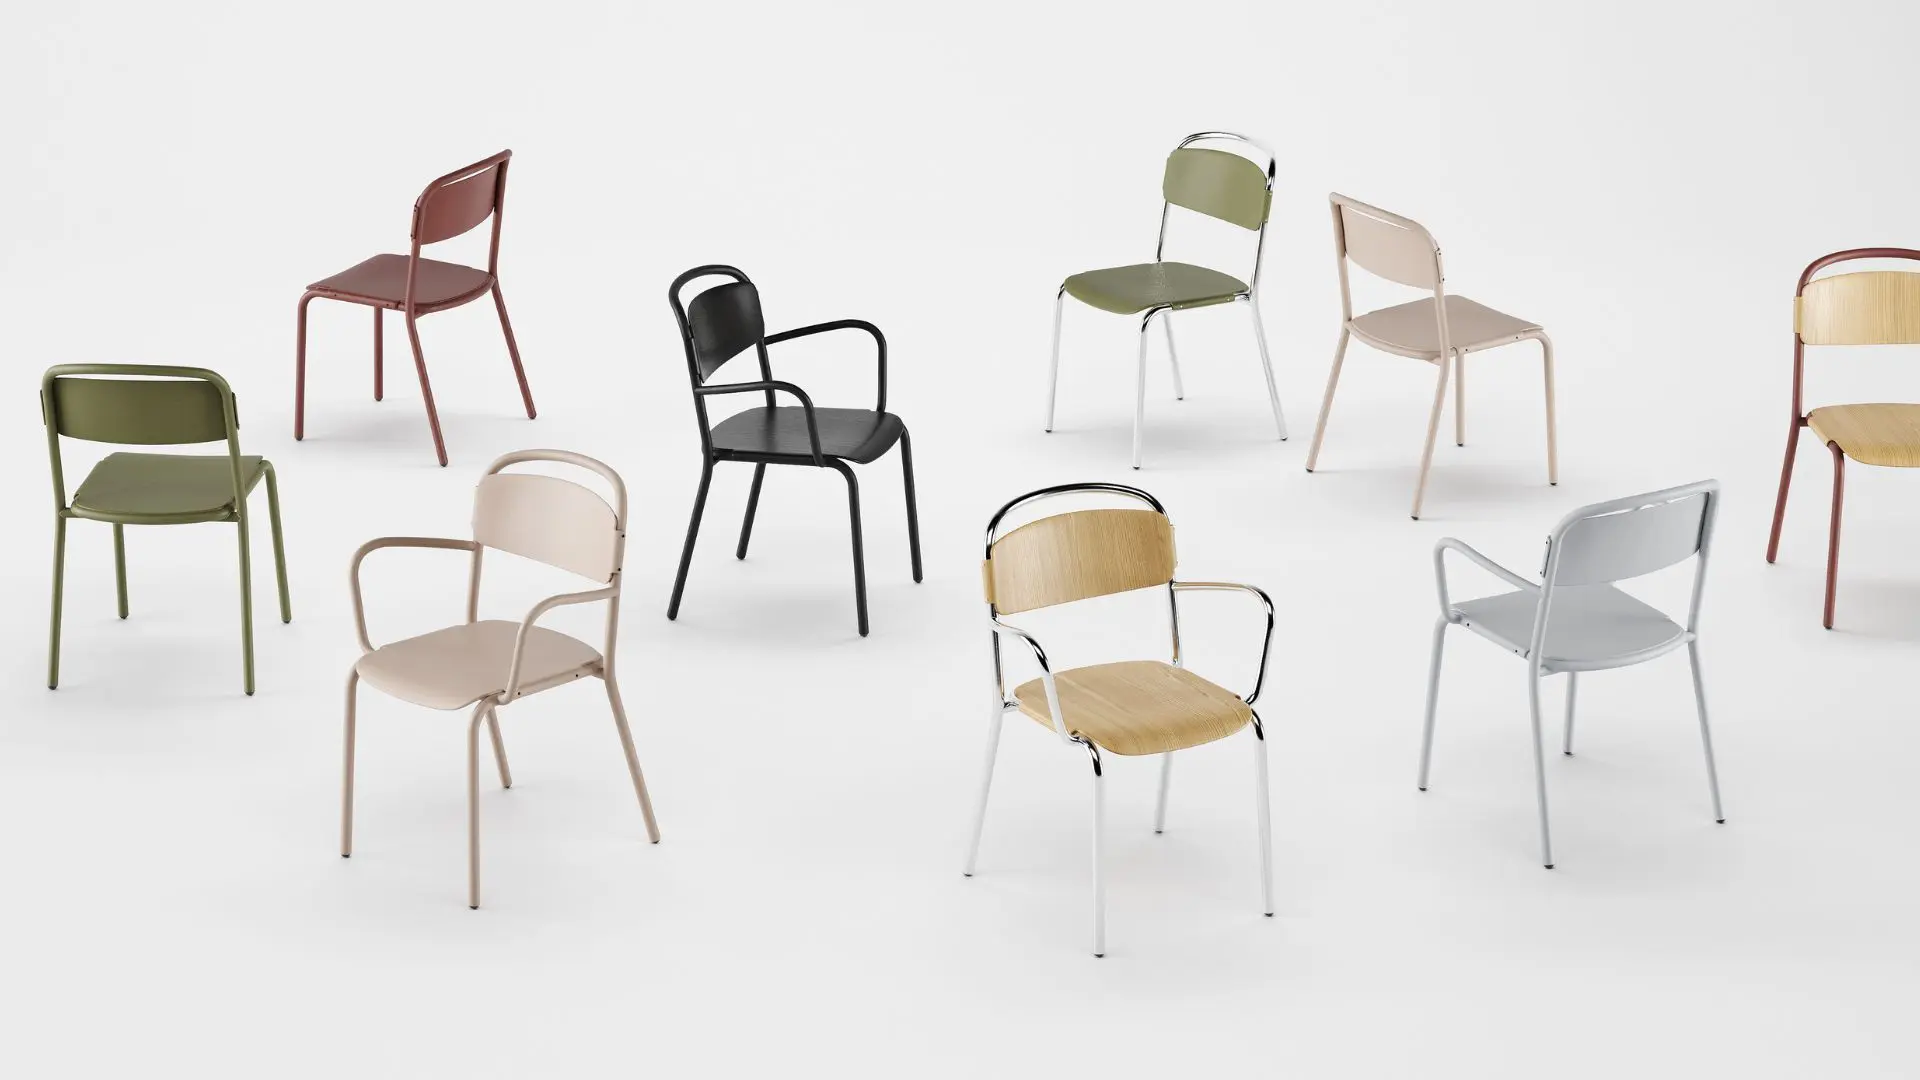 SKOL chair by Needs studio _ Infiniti _ Furniture pieces crafted to enhance productivity - relaxation - social interaction